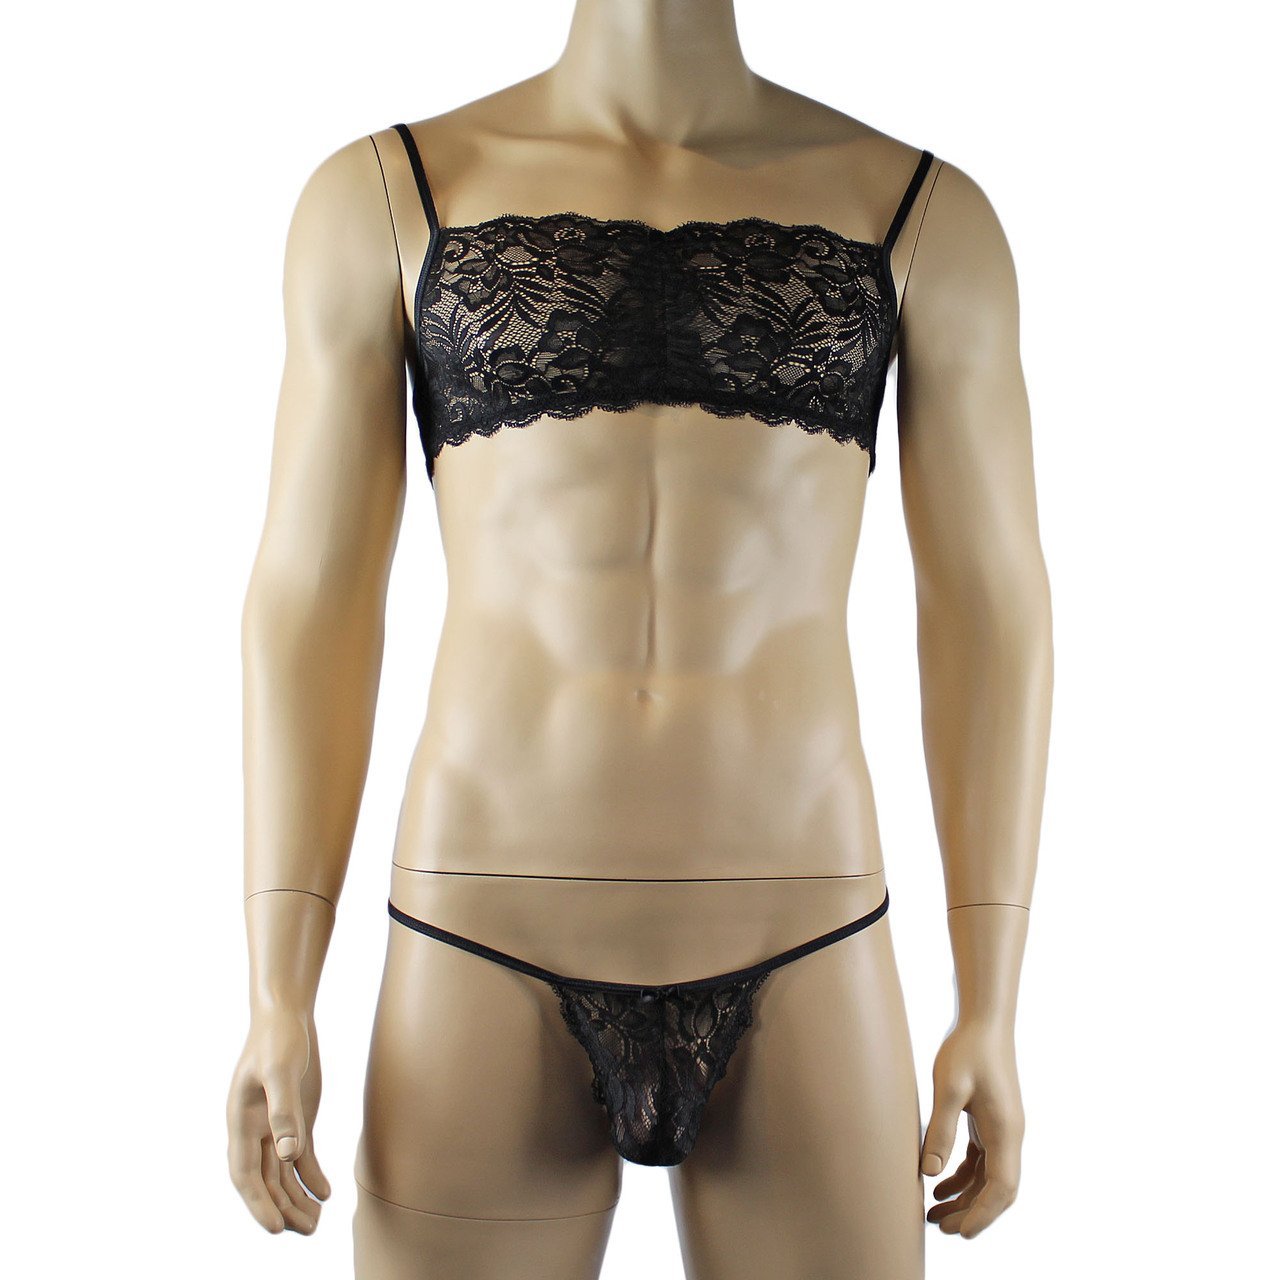 Mens Sexy Lace Bra, Pouch G string, Garterbelt & Stockings (black plus other colours)